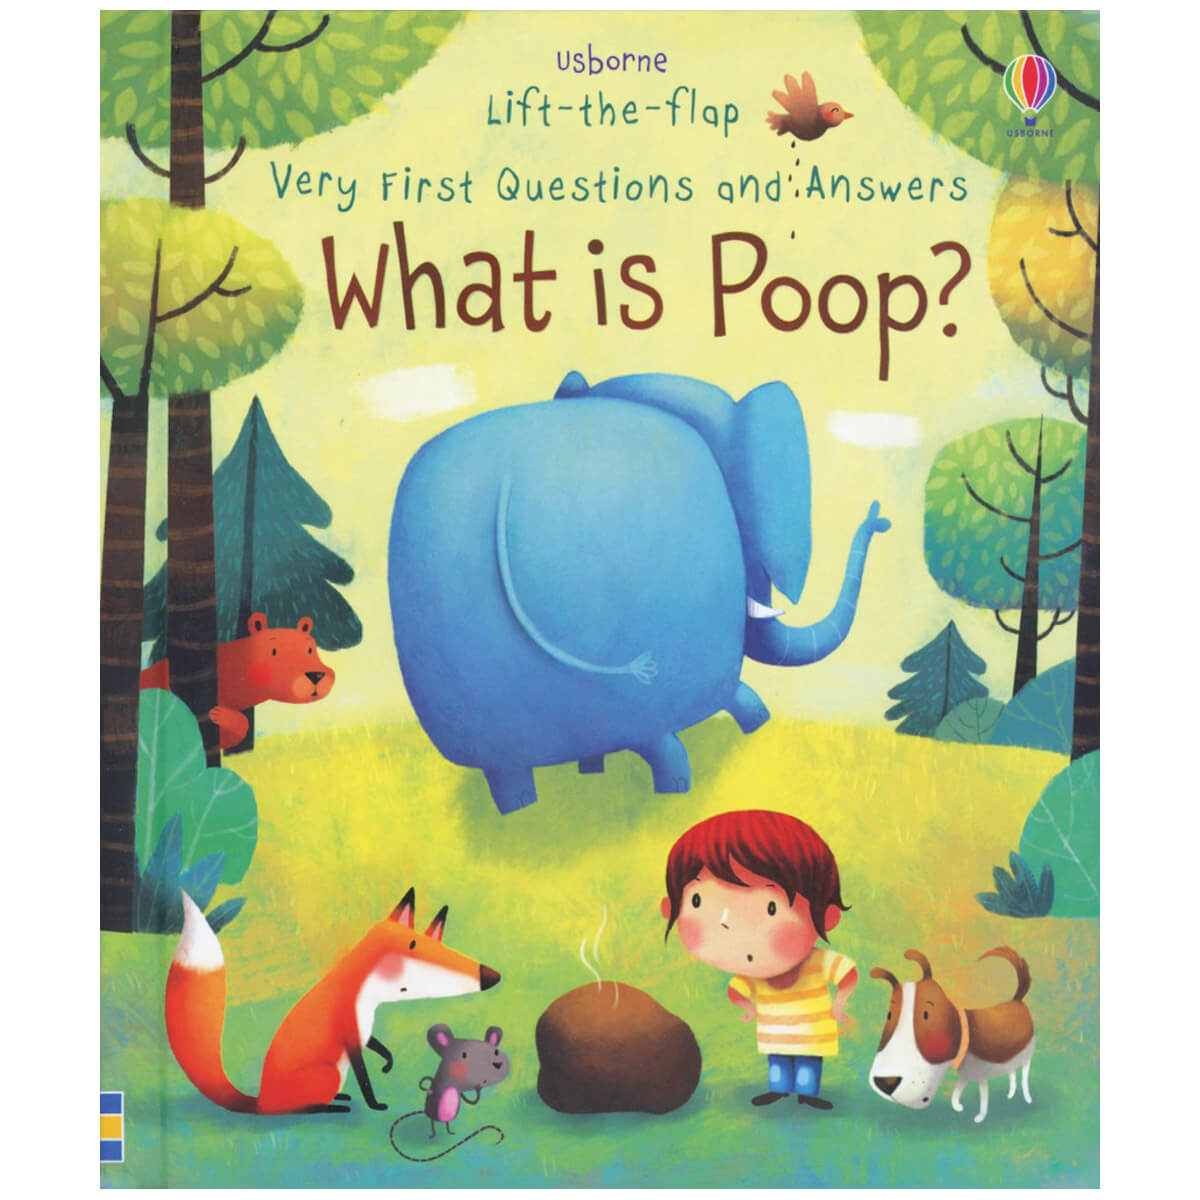 Usborne Lift-the-Flap Very First Questions: What is Poop?